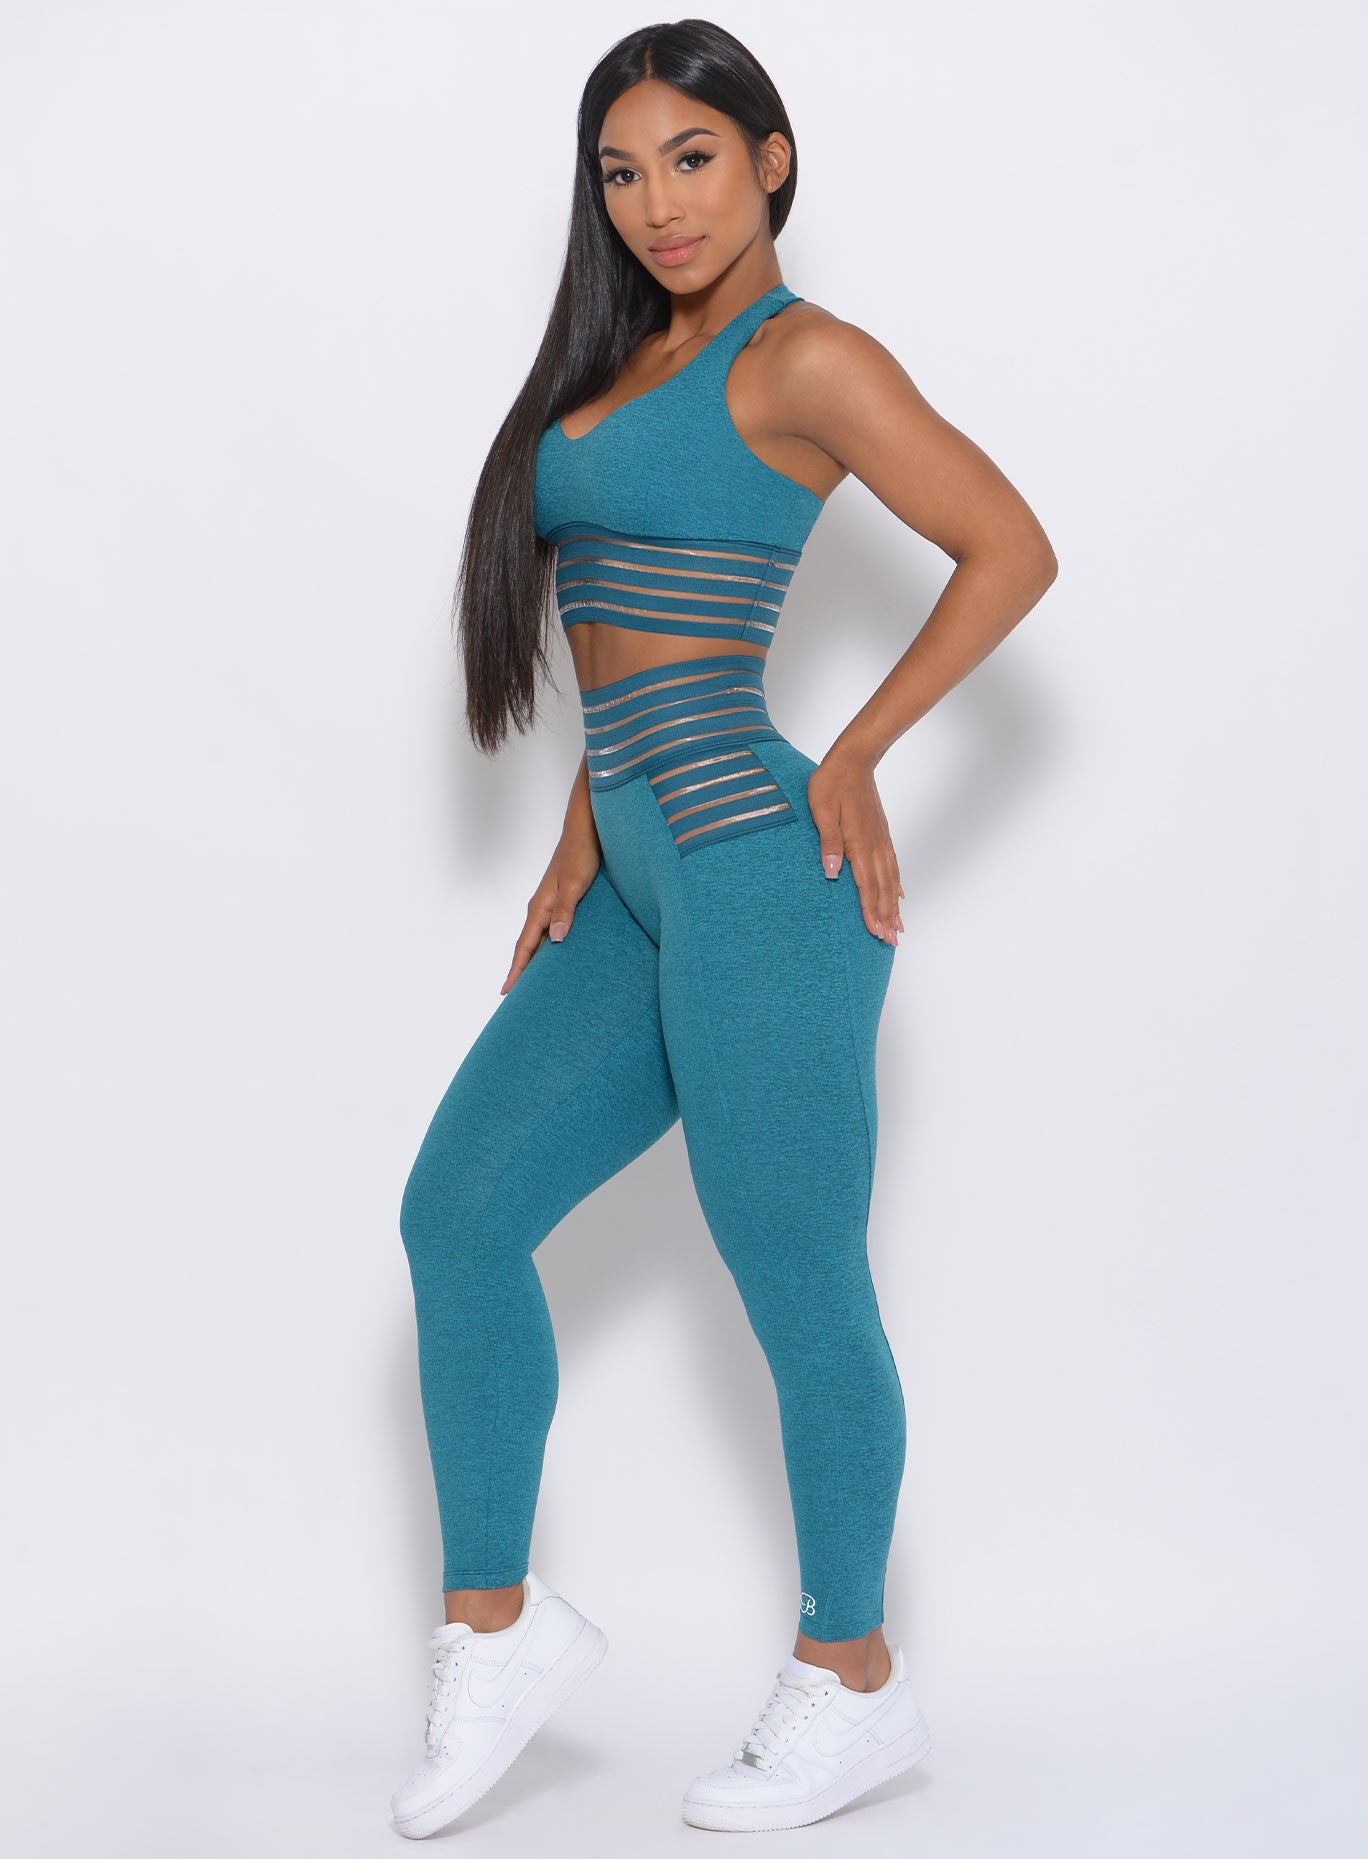 Left side profile view of the model in our statement leggings in seafoam color and a matching bra